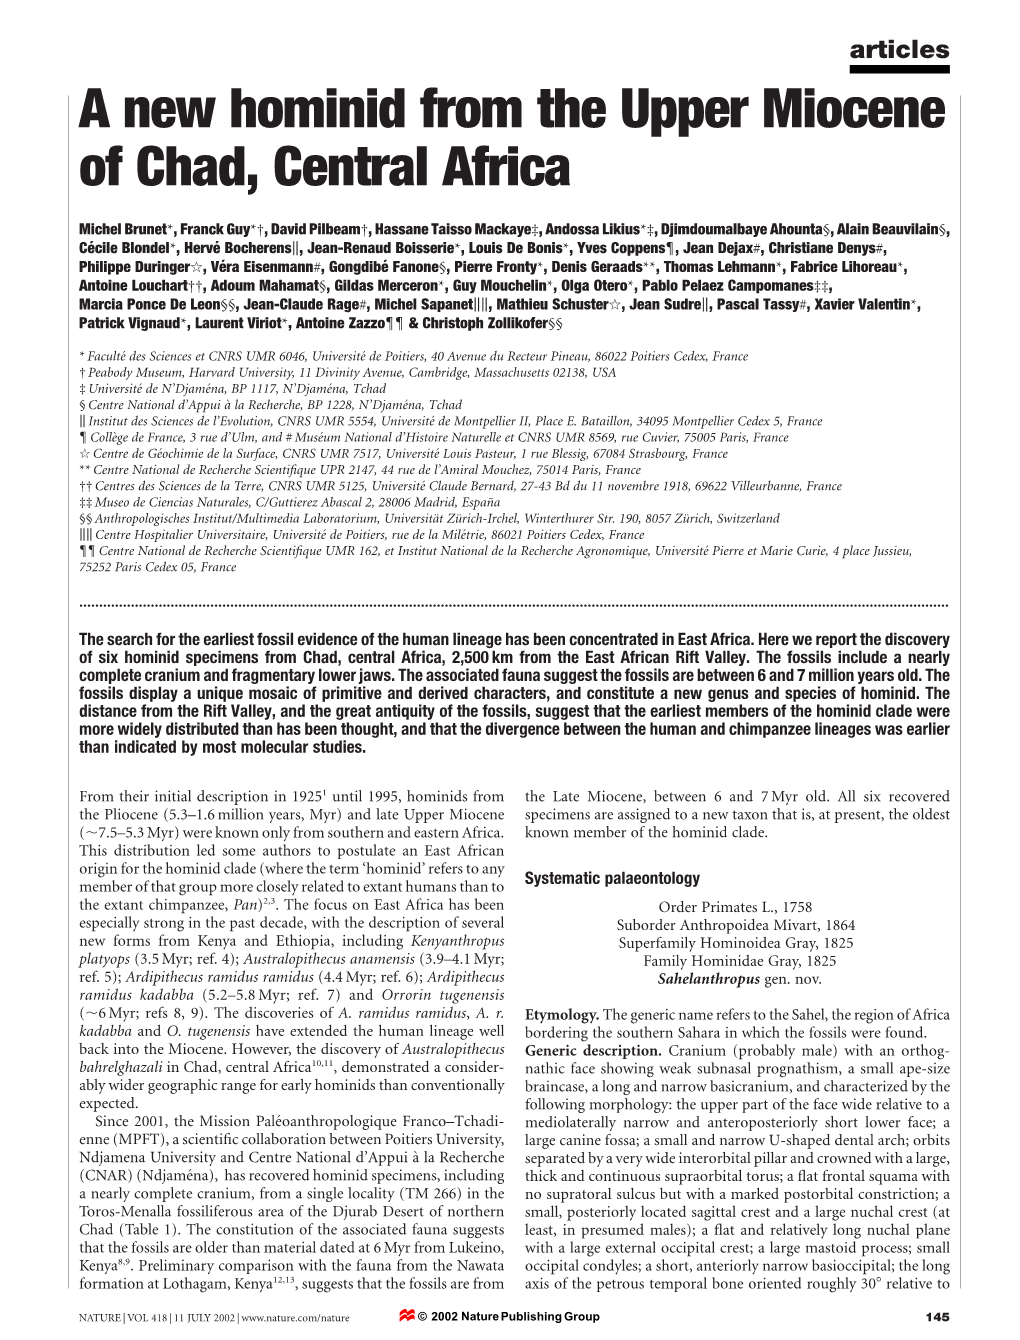 A New Hominid from the Upper Miocene of Chad, Central Africa